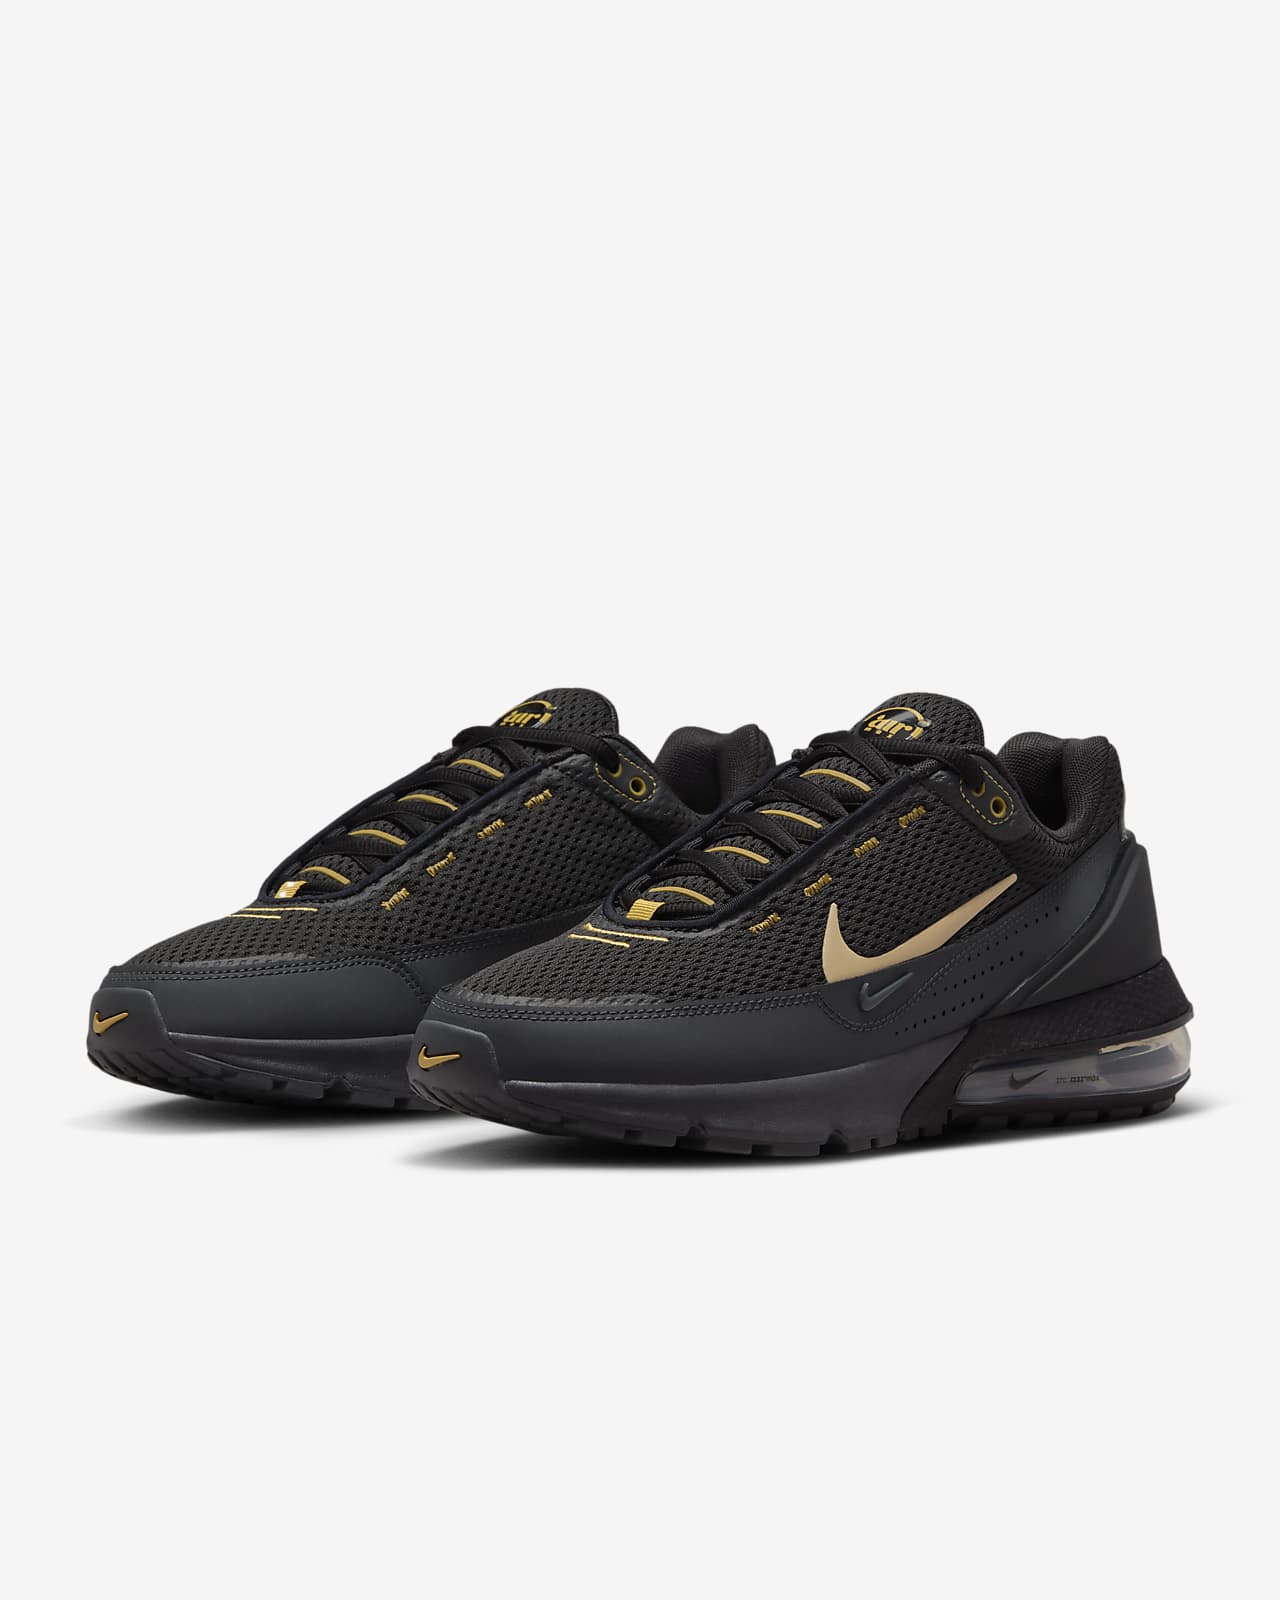 Nike Air Max Pulse Black Women's Shoes, Size: 8.5